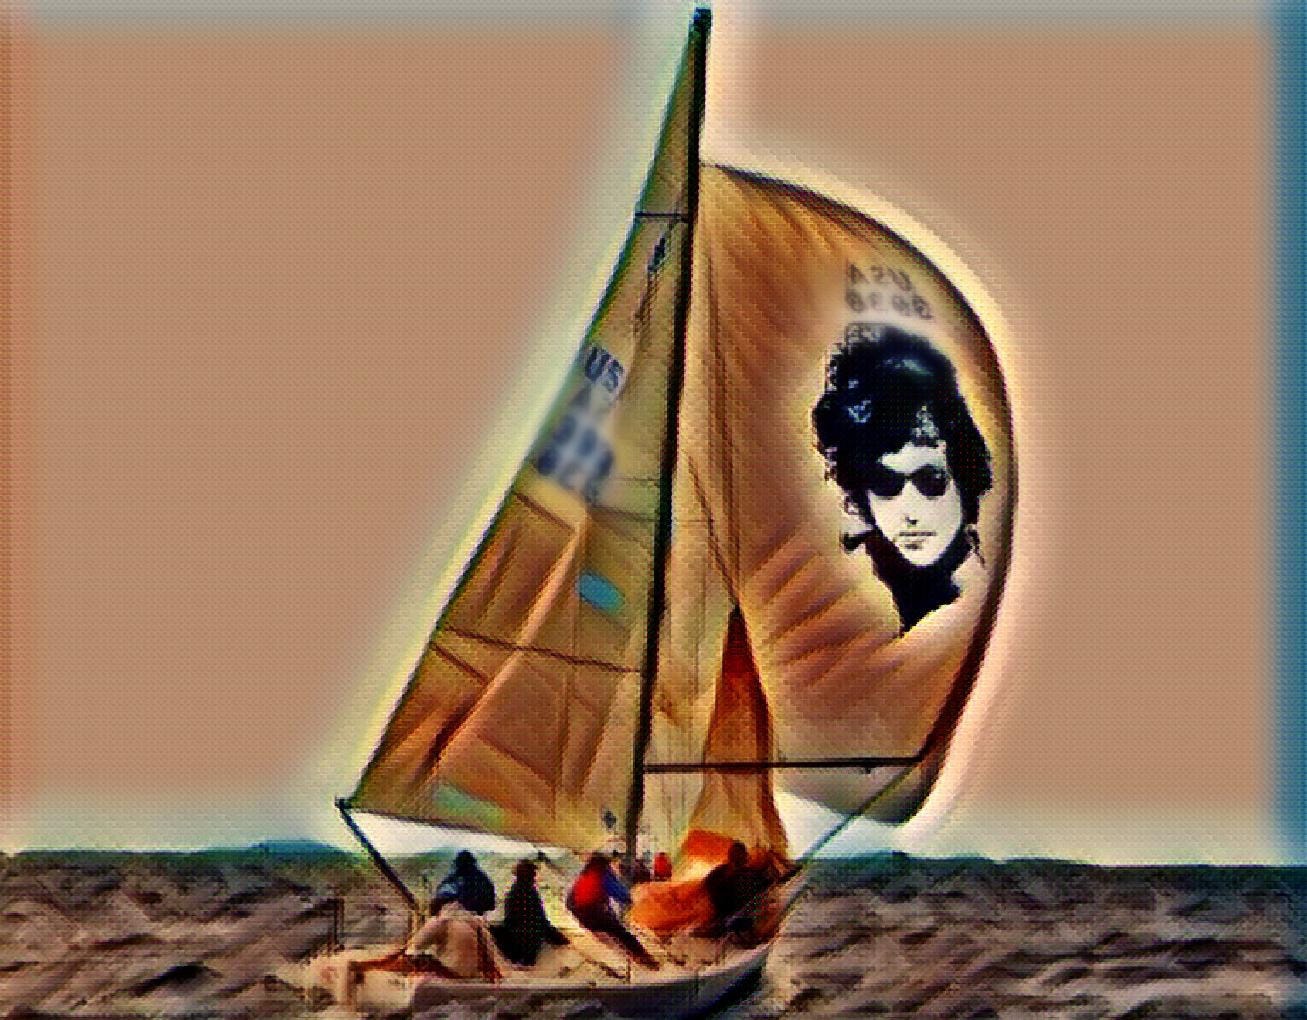 Sailboat with dylan image on sail